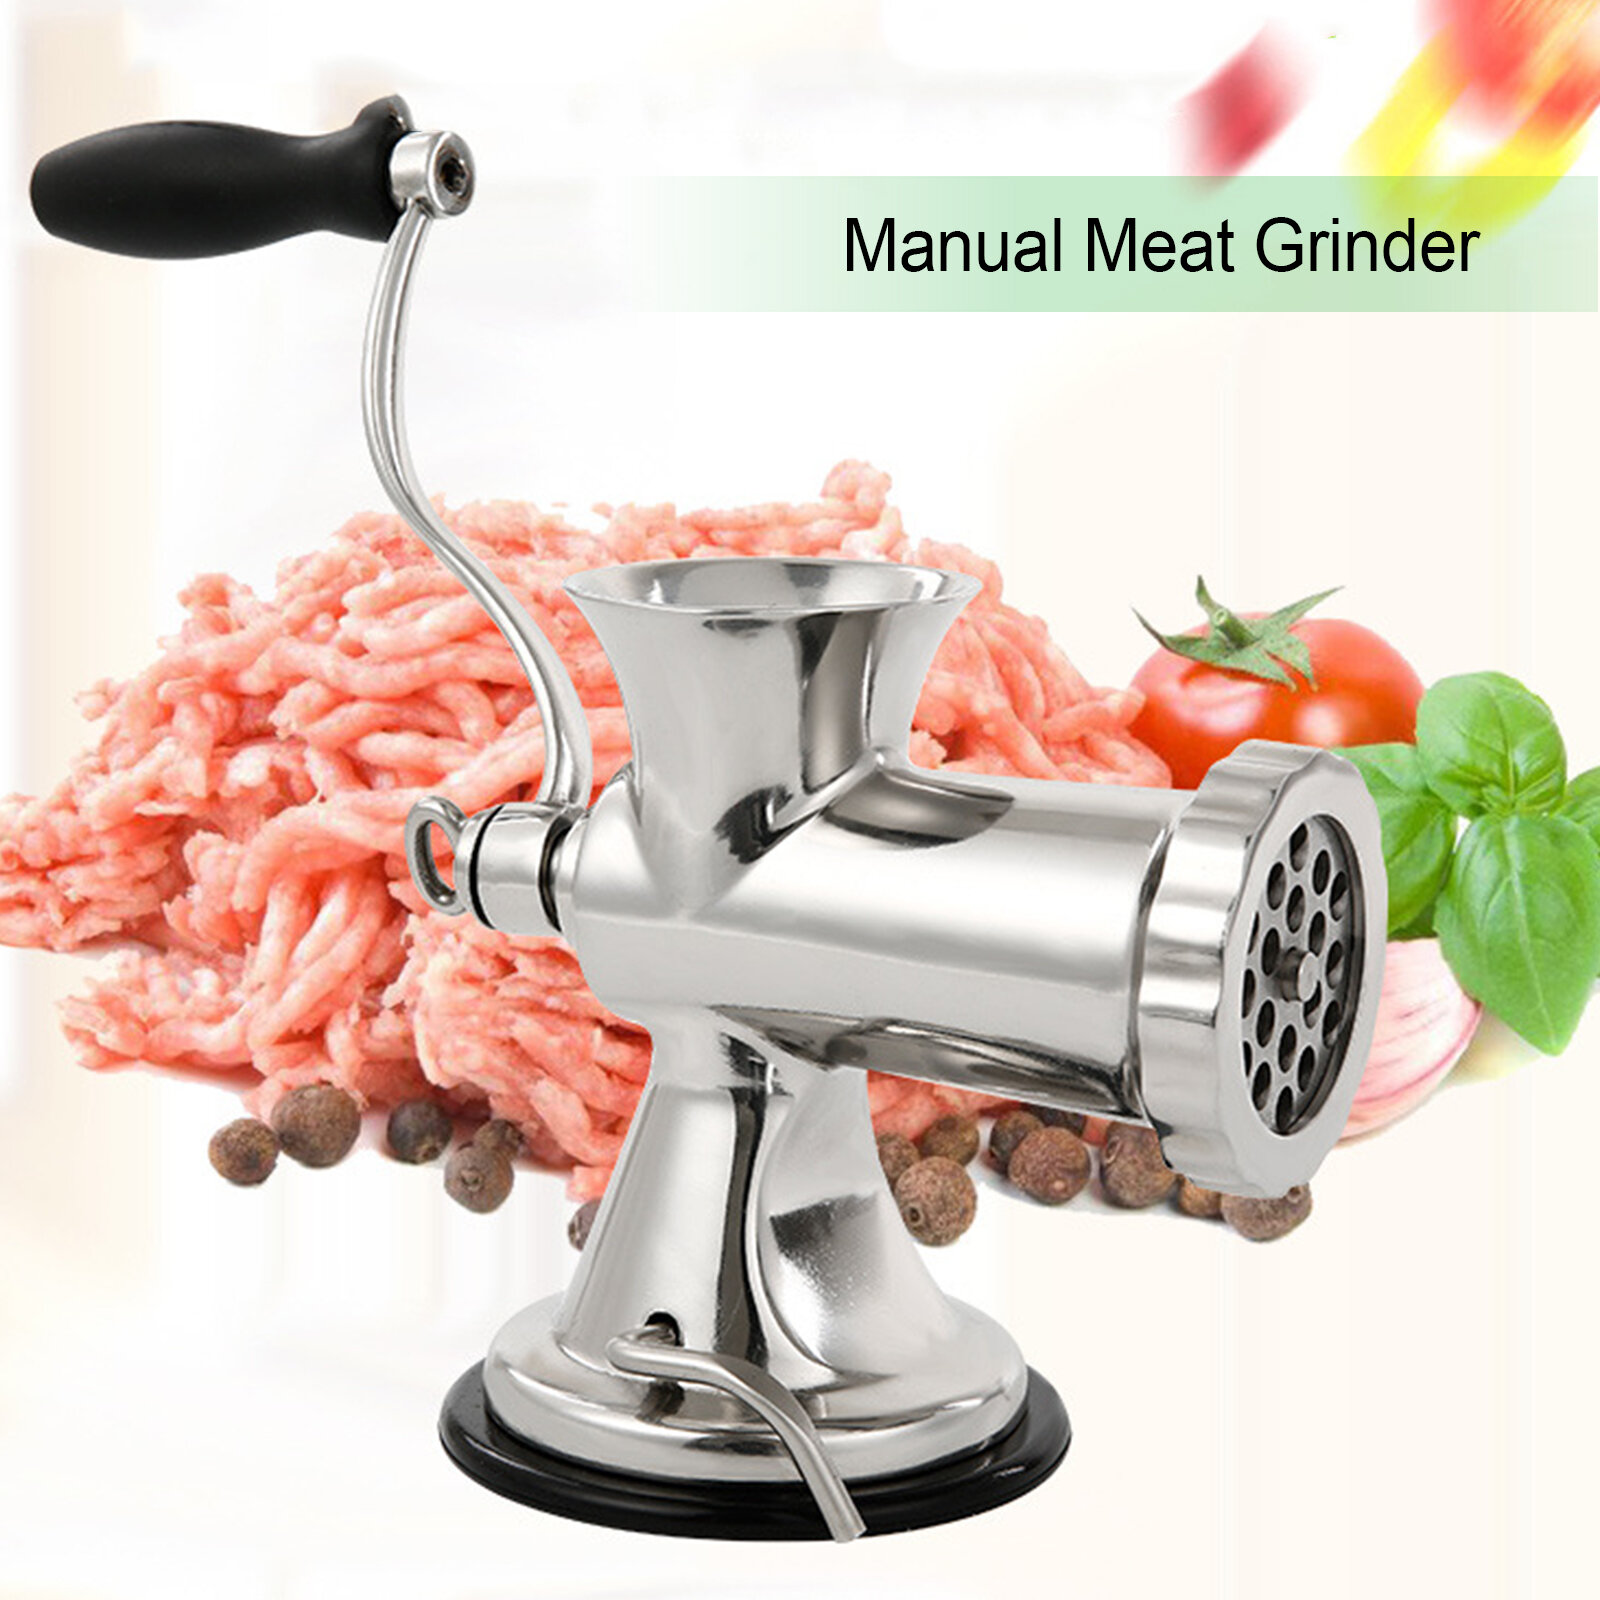 Pepper for Pork Mushroom Sausage Filler Manual Meat Grinder Beef 3 Piece Enema Chicken Fish Stainless Steel Meat Grinder with Suction Cup 